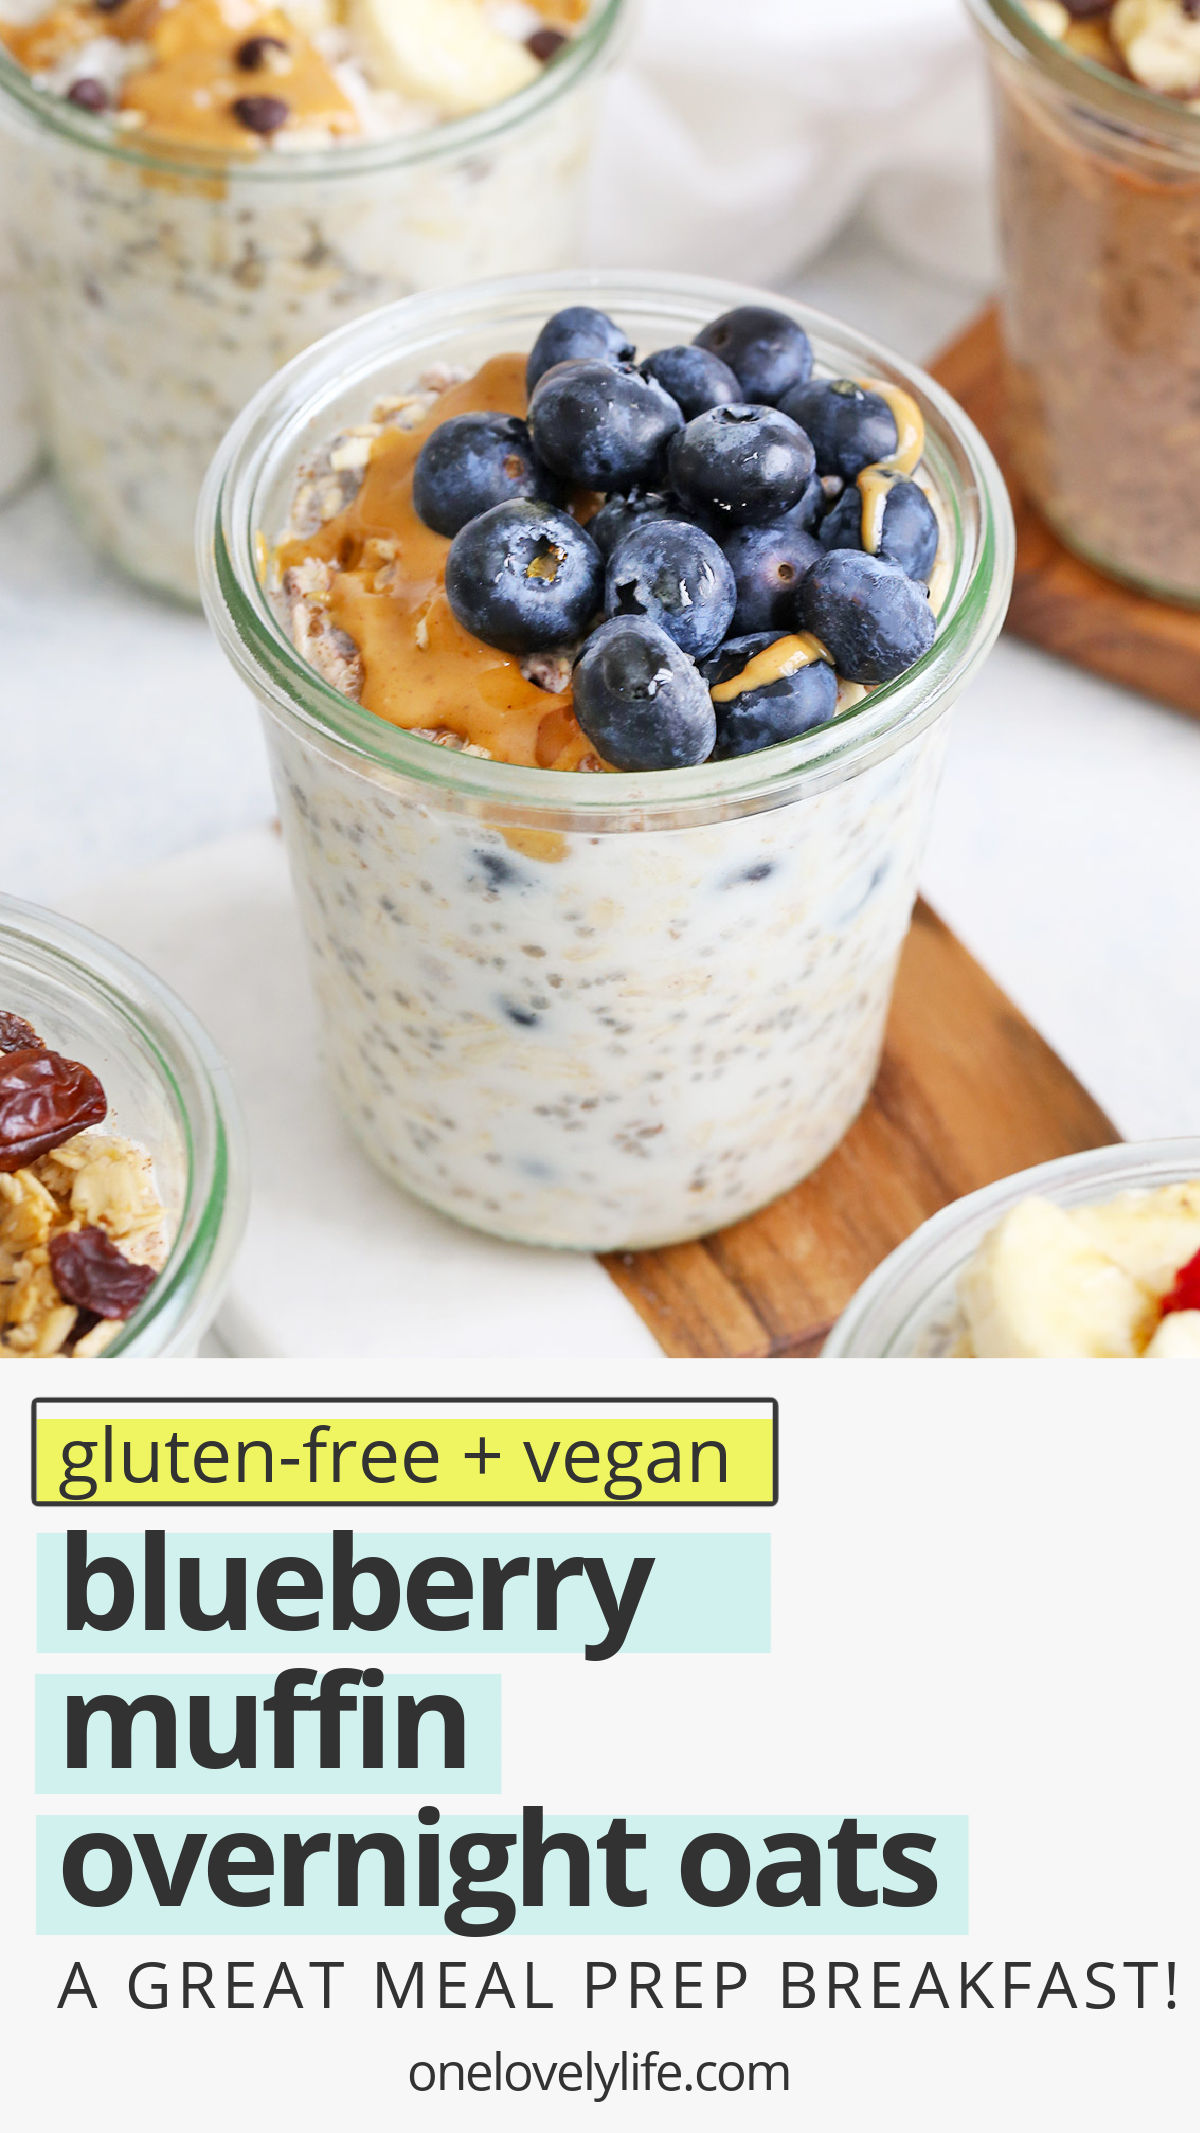 Blueberry Muffin Overnight Oats - Creamy, delicious overnight oats with a blueberry muffin twist!  You'll love this yummy meal prep breakfast! (Gluten-free, vegan) // Meal Prep Breakfast // Blueberry Overnight Oats // Healthy Breakfast #glutenfree #overnightoats #oatmeal #vegan #healthybreakfast